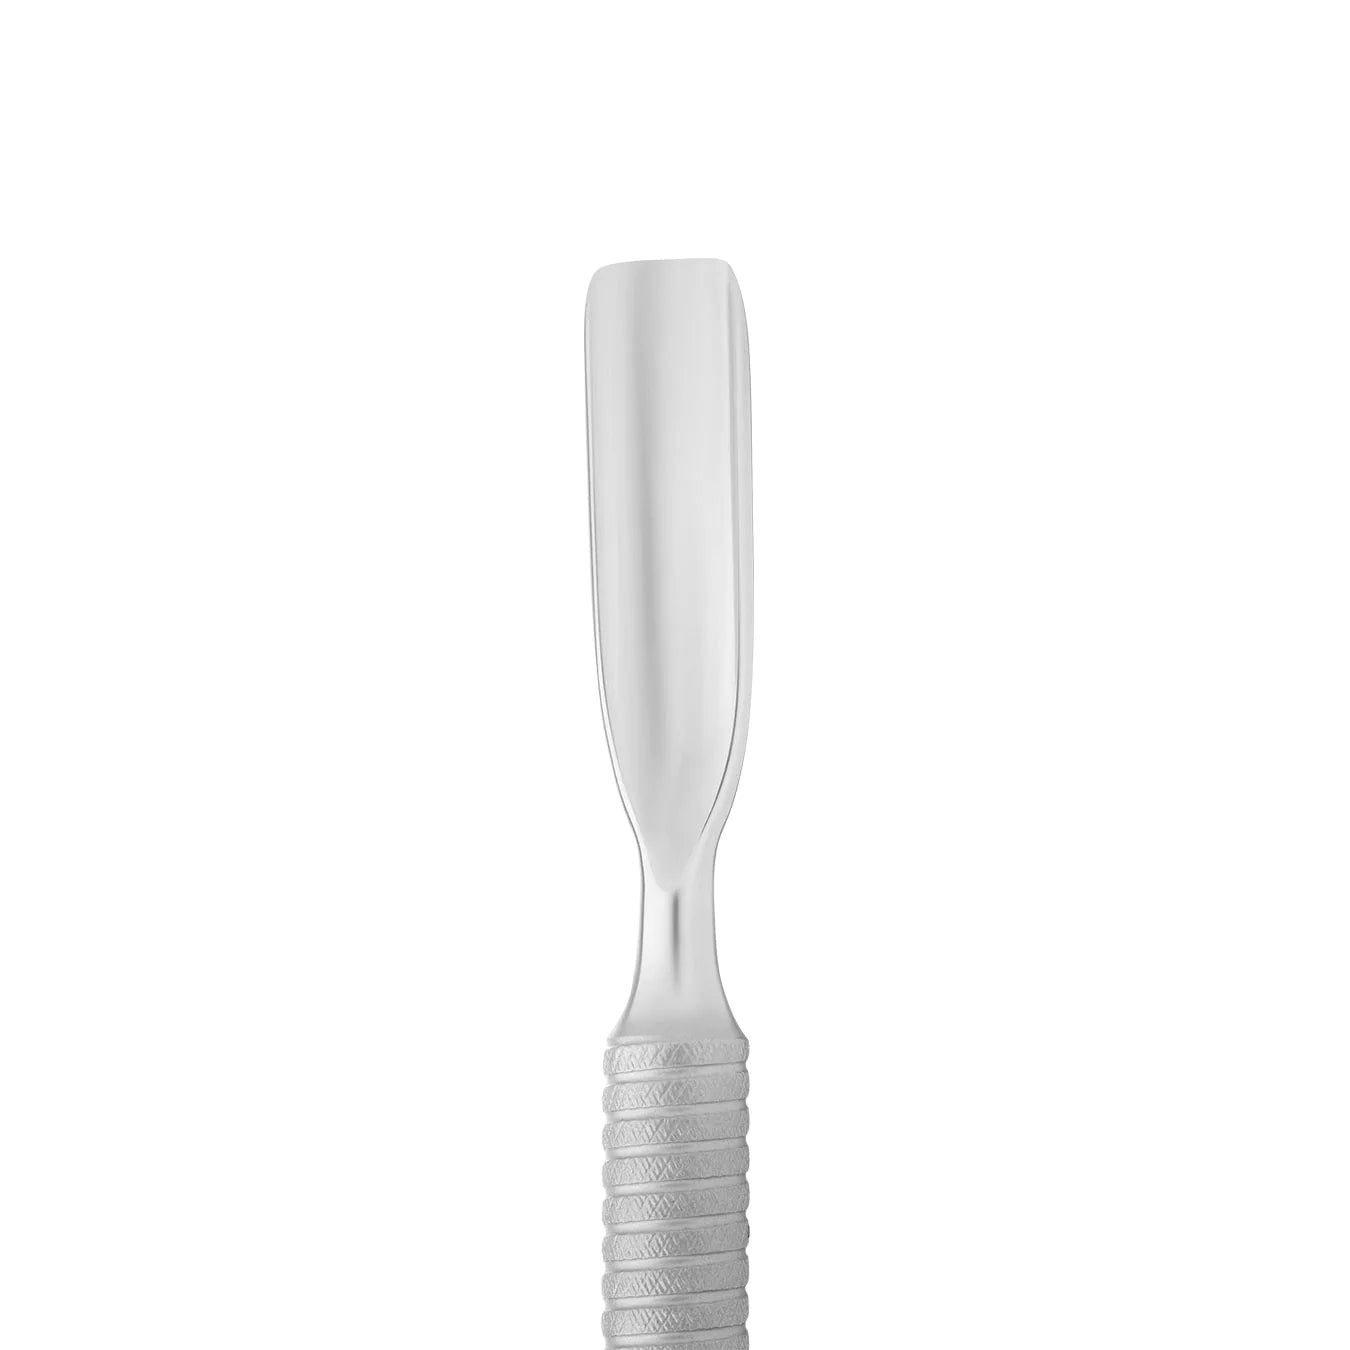 Cuticle pusher SMART 51 TYPE 2 (rectangular pusher and remover) -PS-51/2